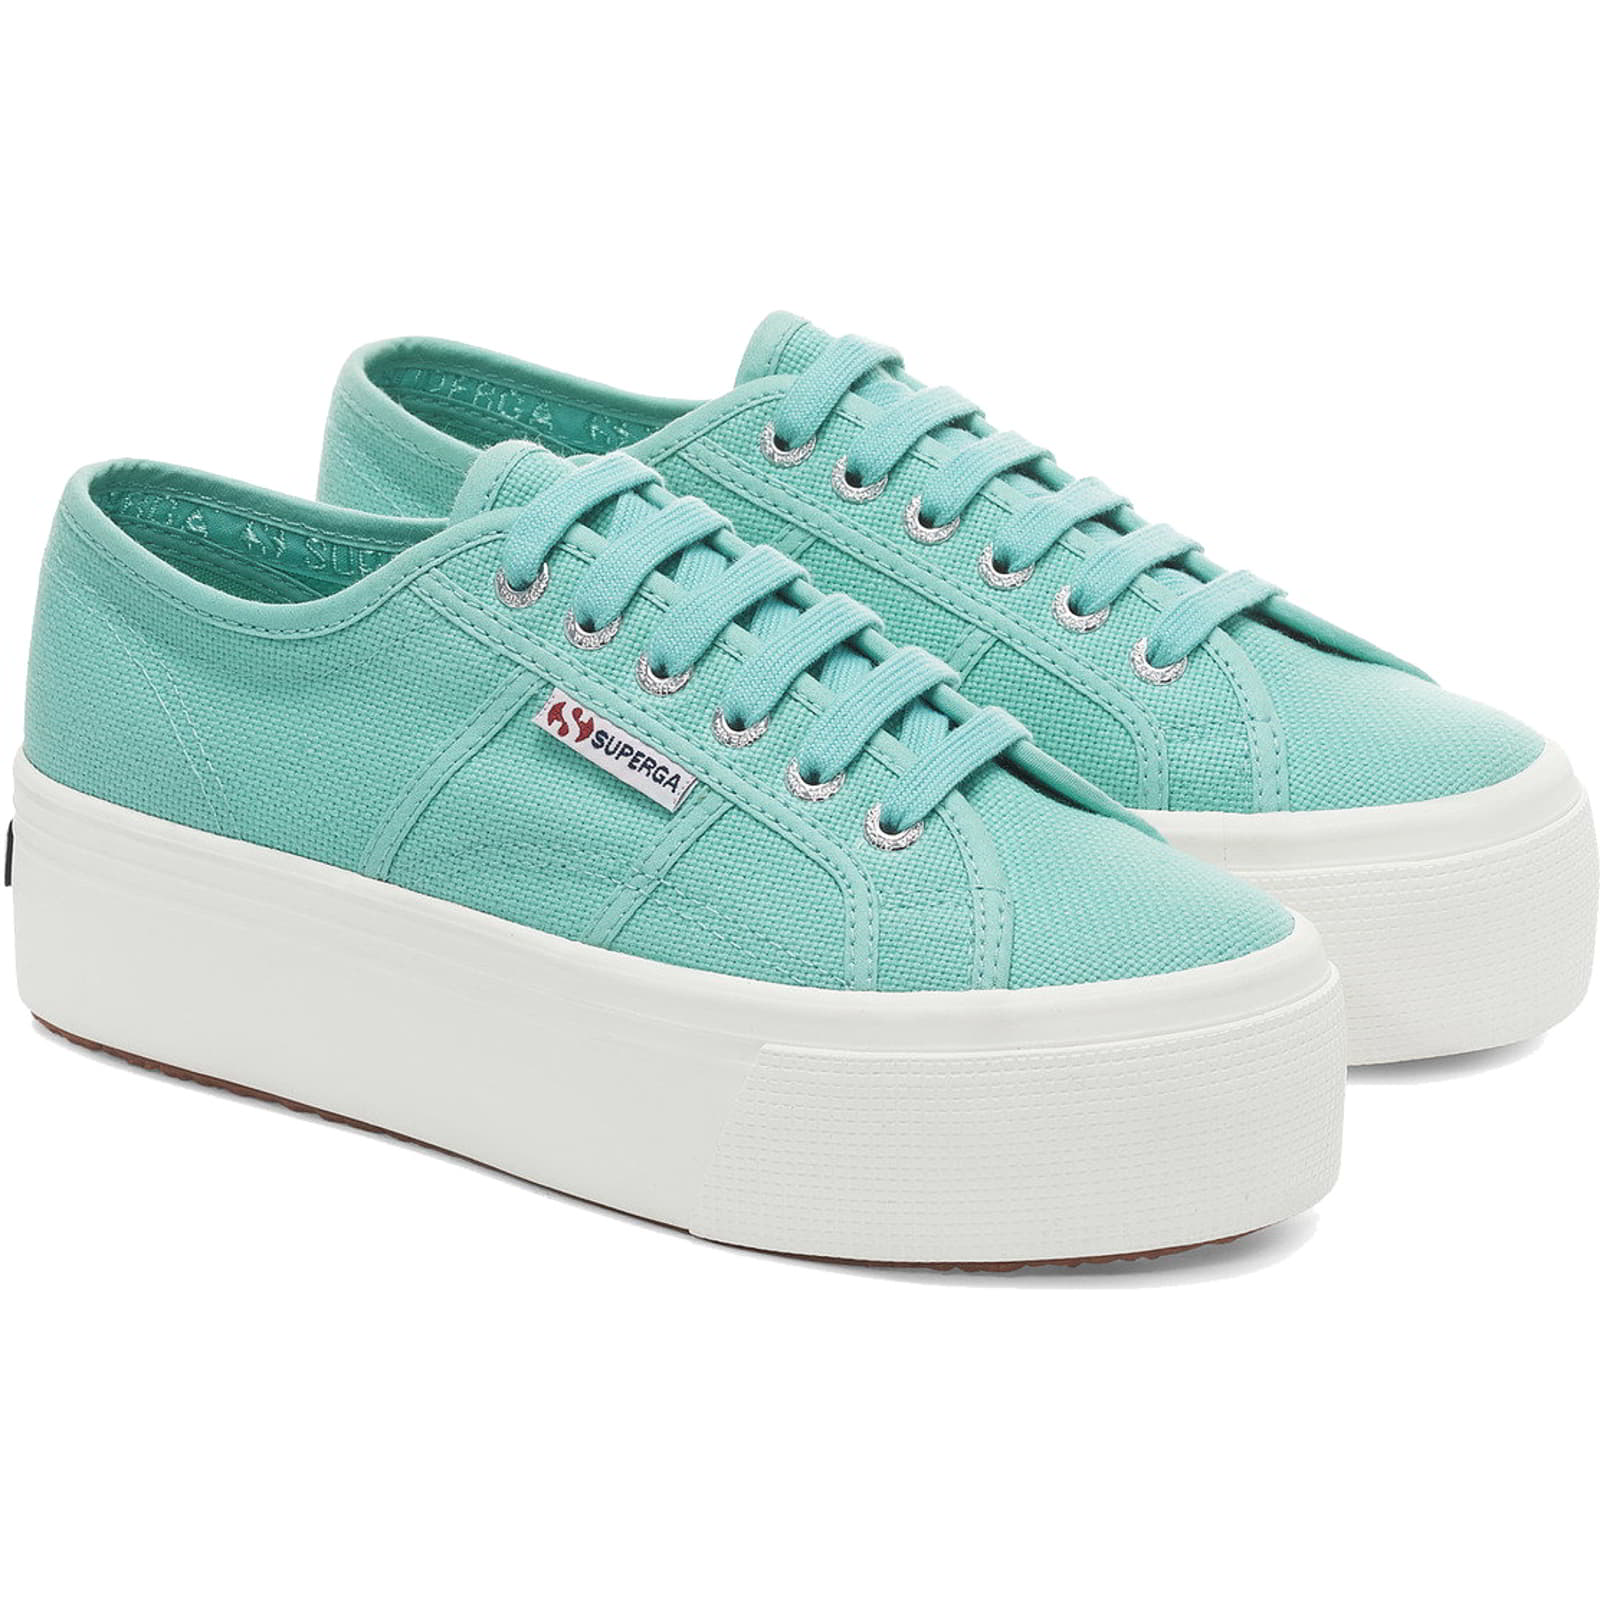 Superga Women's 2790 Linea Up and Down Platform Trainers Shoes - UK 6.5